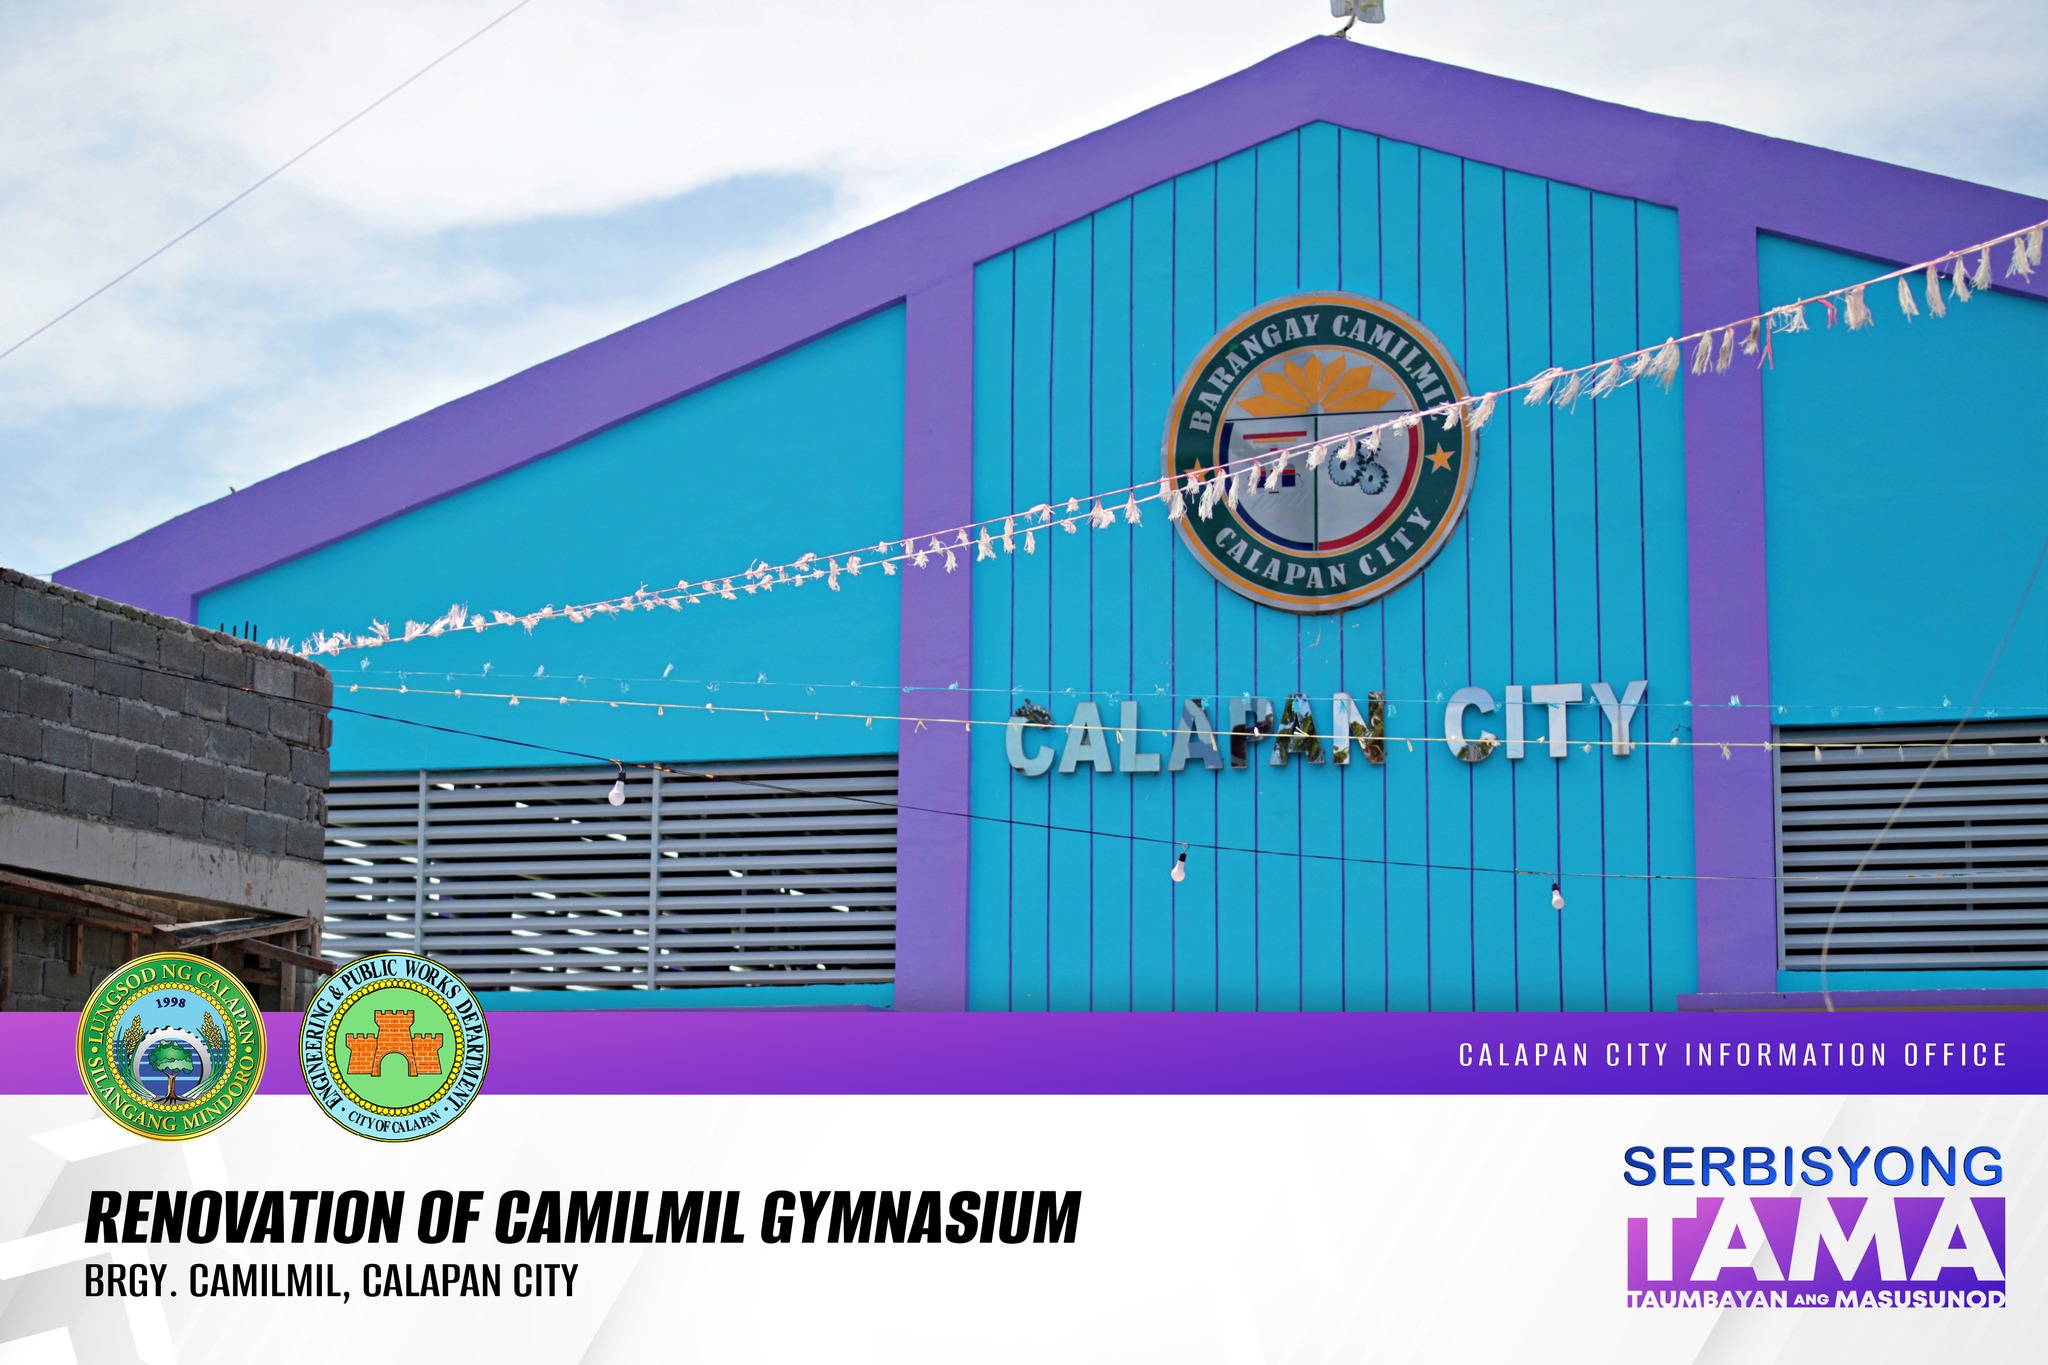 Inauguration of the newly renovated and improved Camilmil Gymnasium